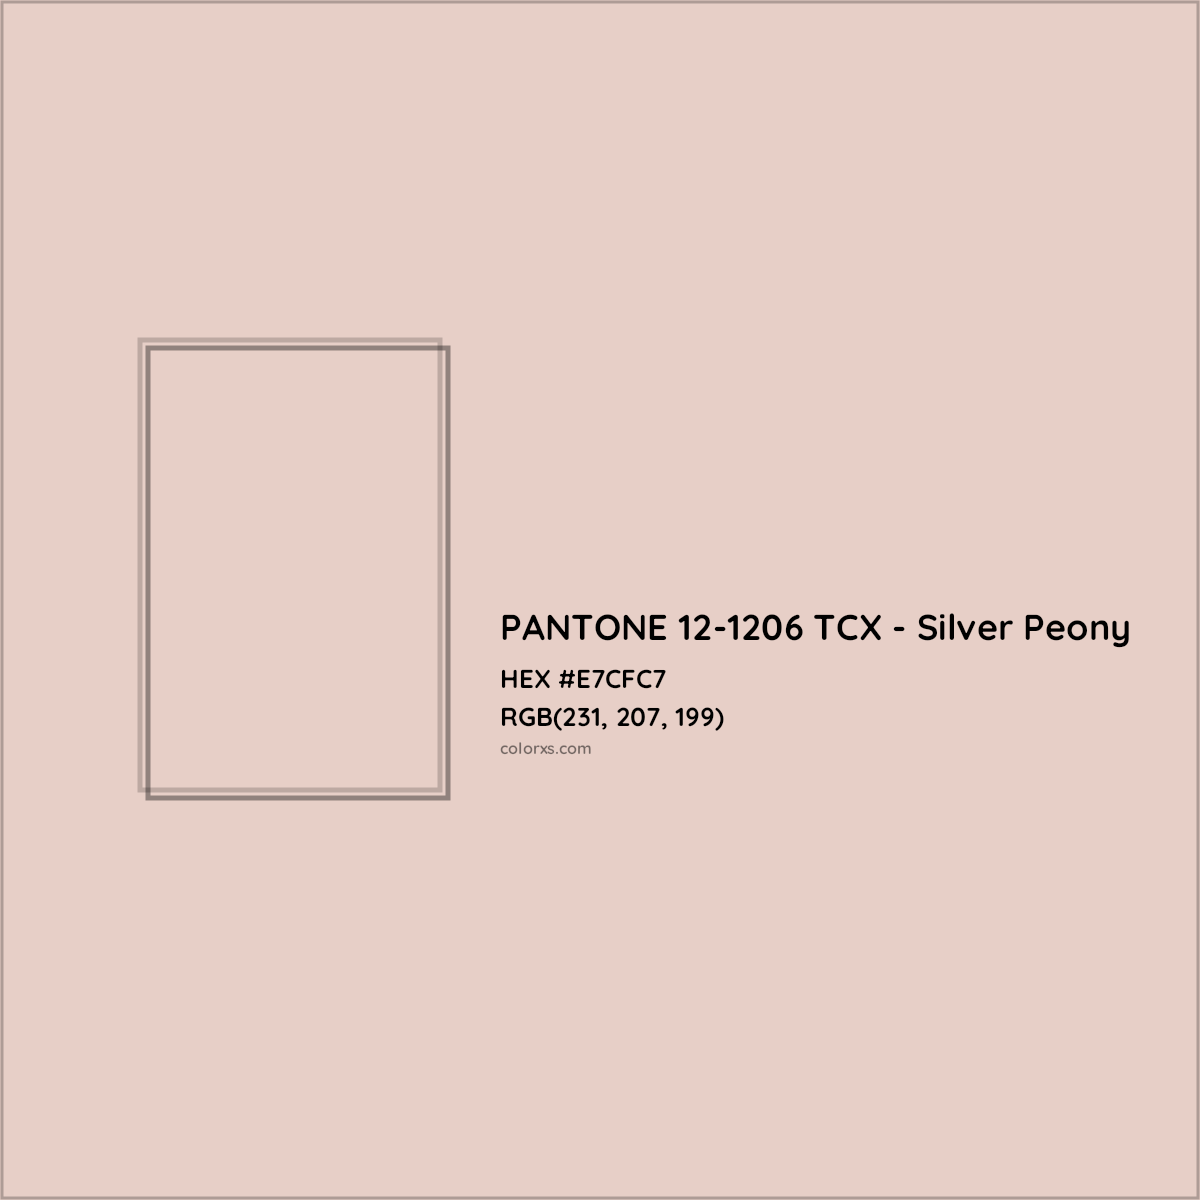 About PANTONE 12-1206 TCX - Silver Peony Color - Color codes, similar ...